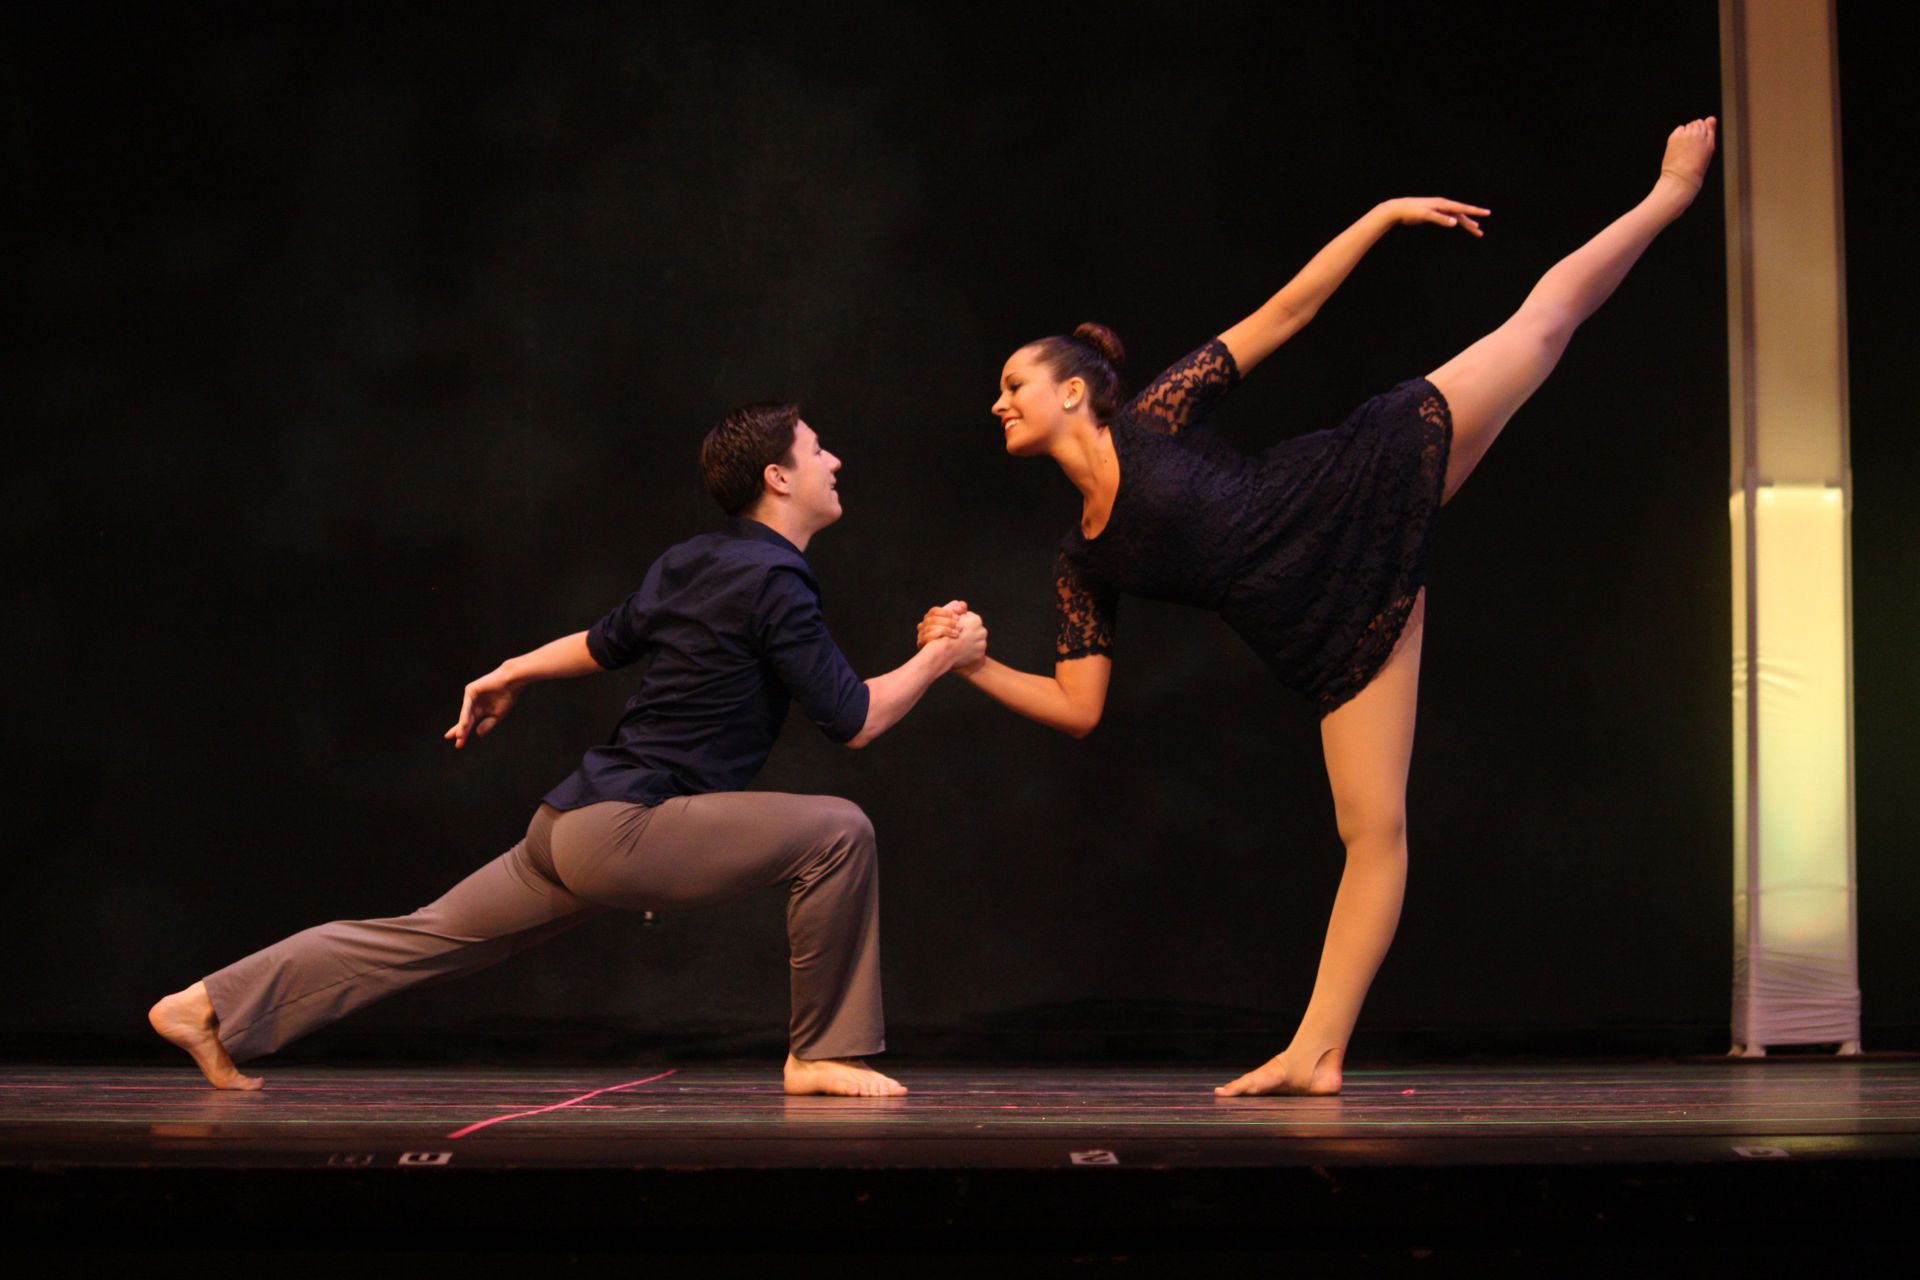 Two Lyrical Jazz Performers at Dance Expression dance arts